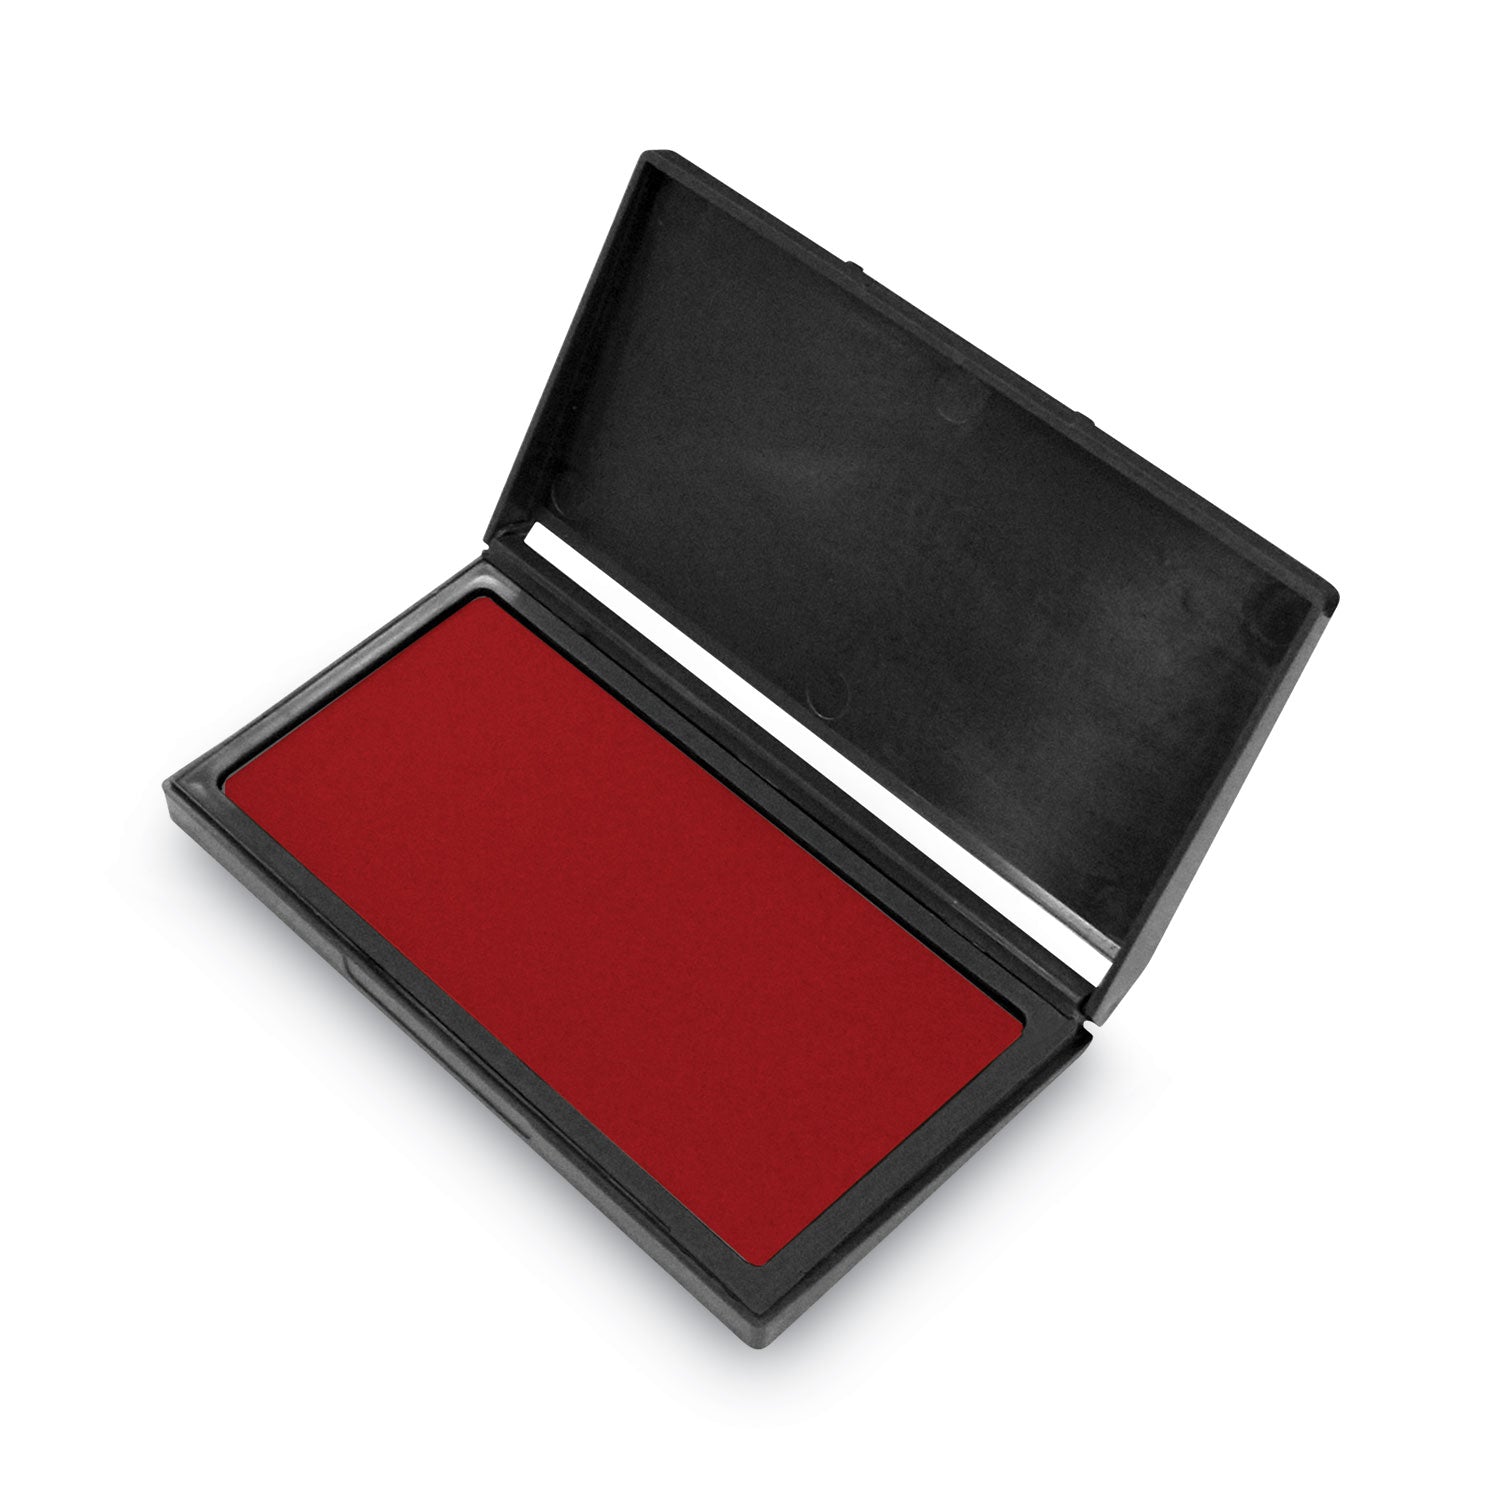 Microgel Stamp Pad for 2000 PLUS, 4.25" x 2.75", Red - 